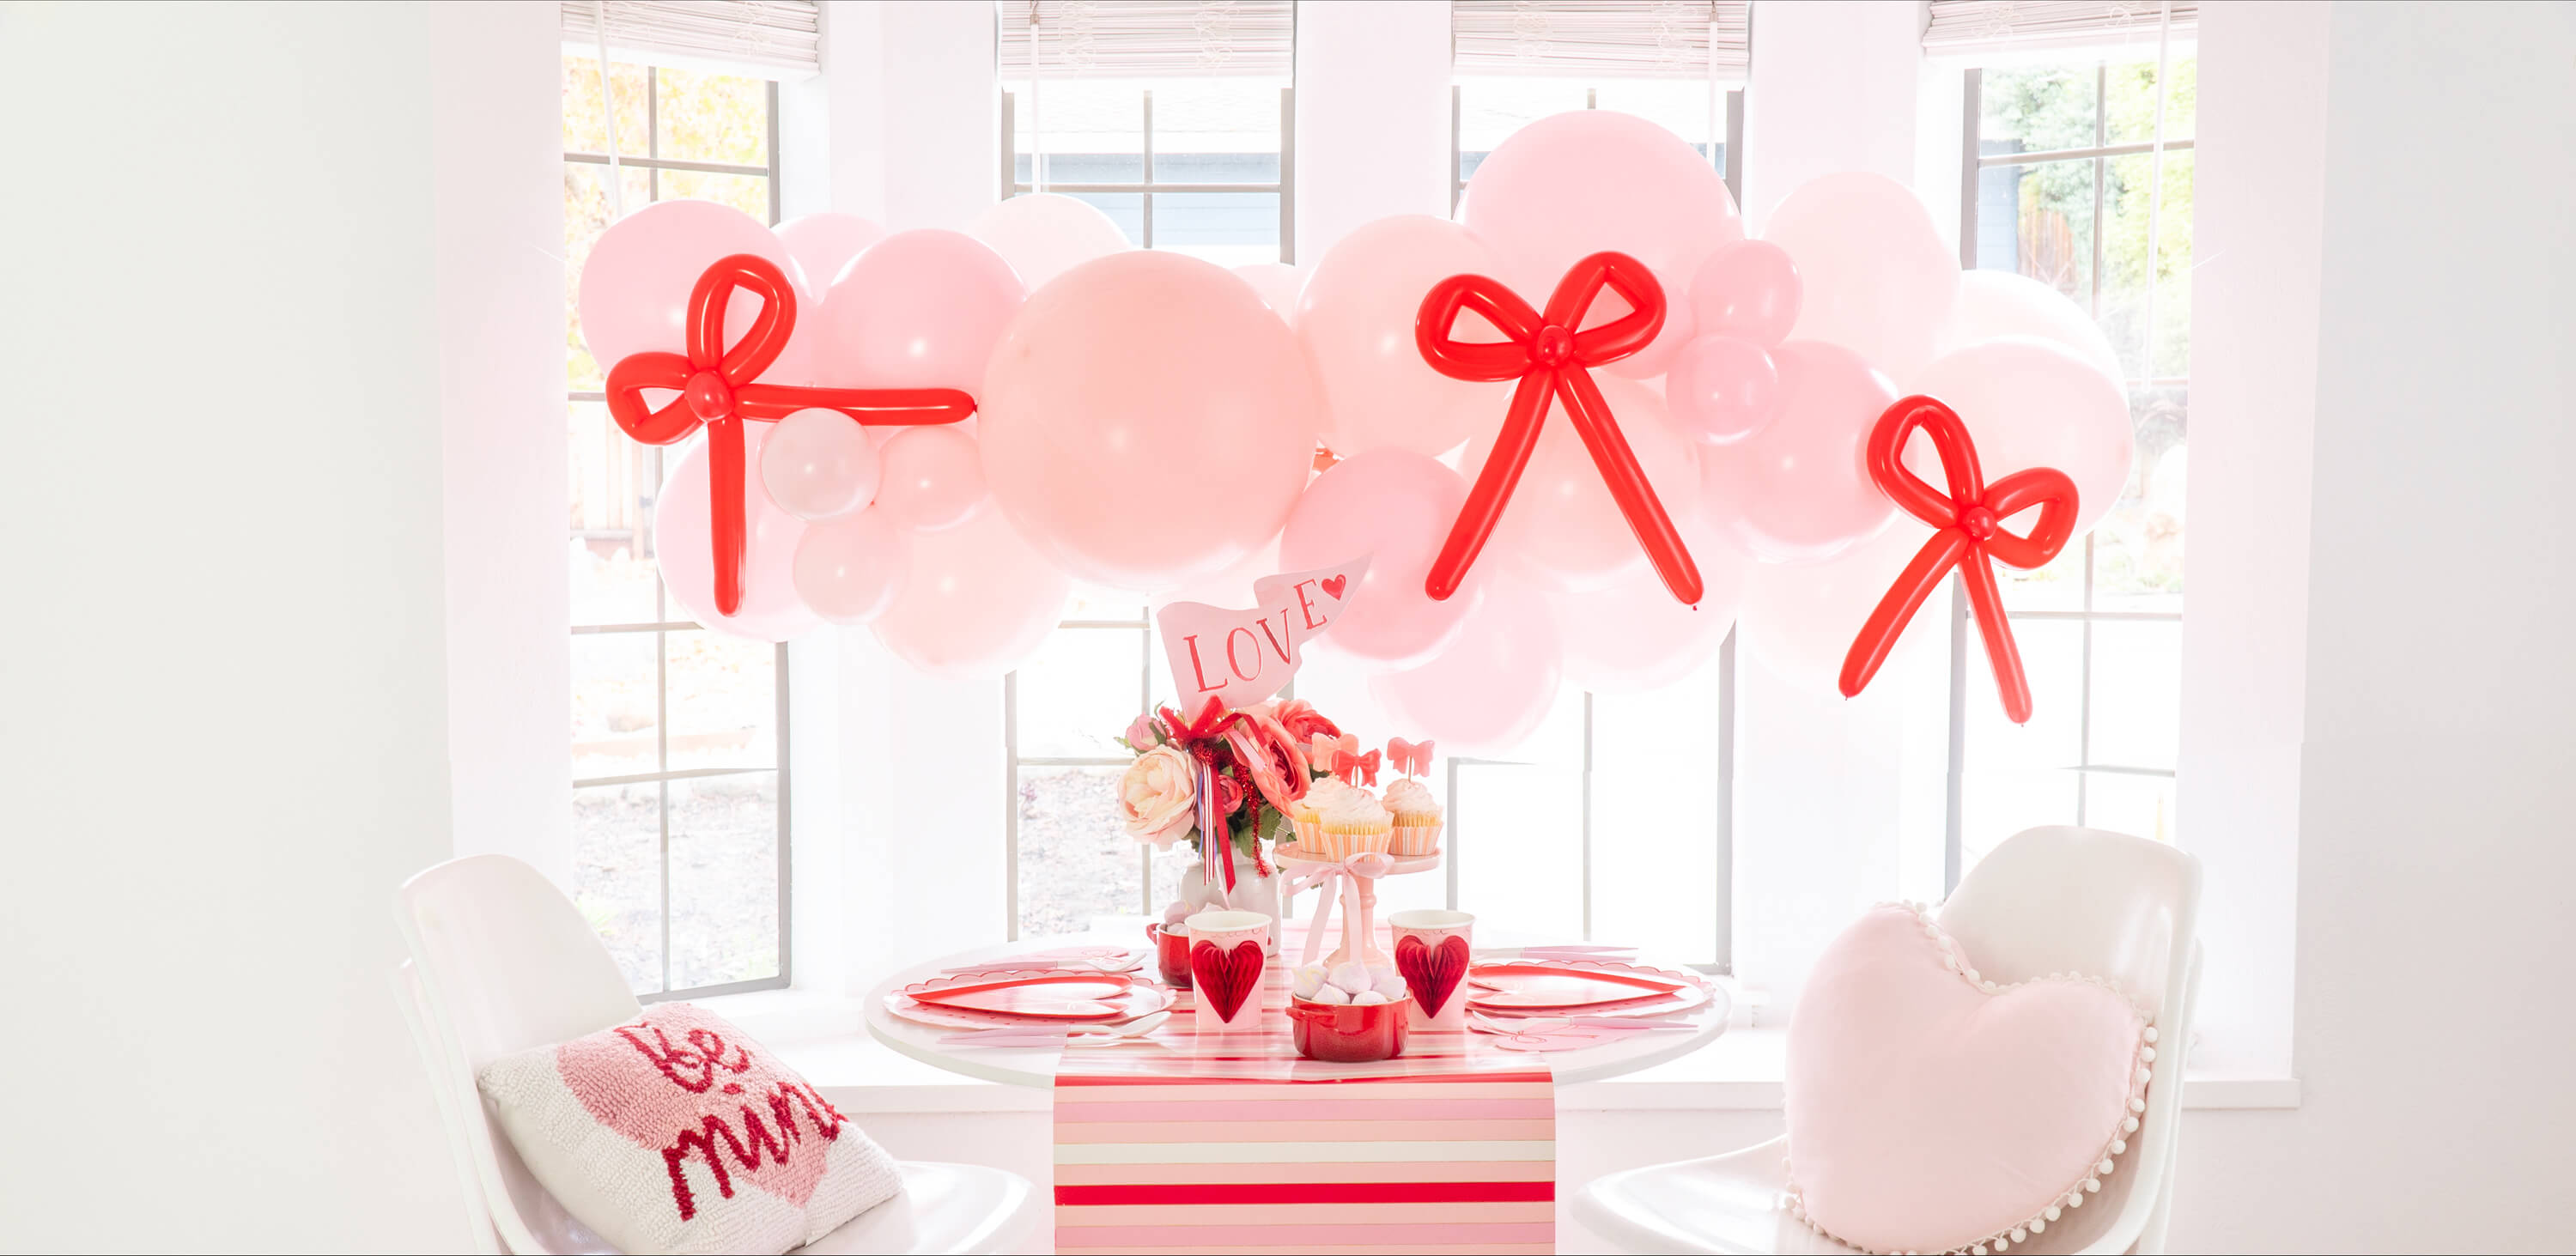 Tutti Frutti Baby Shower Ideas & Inspiration // Hostess with the